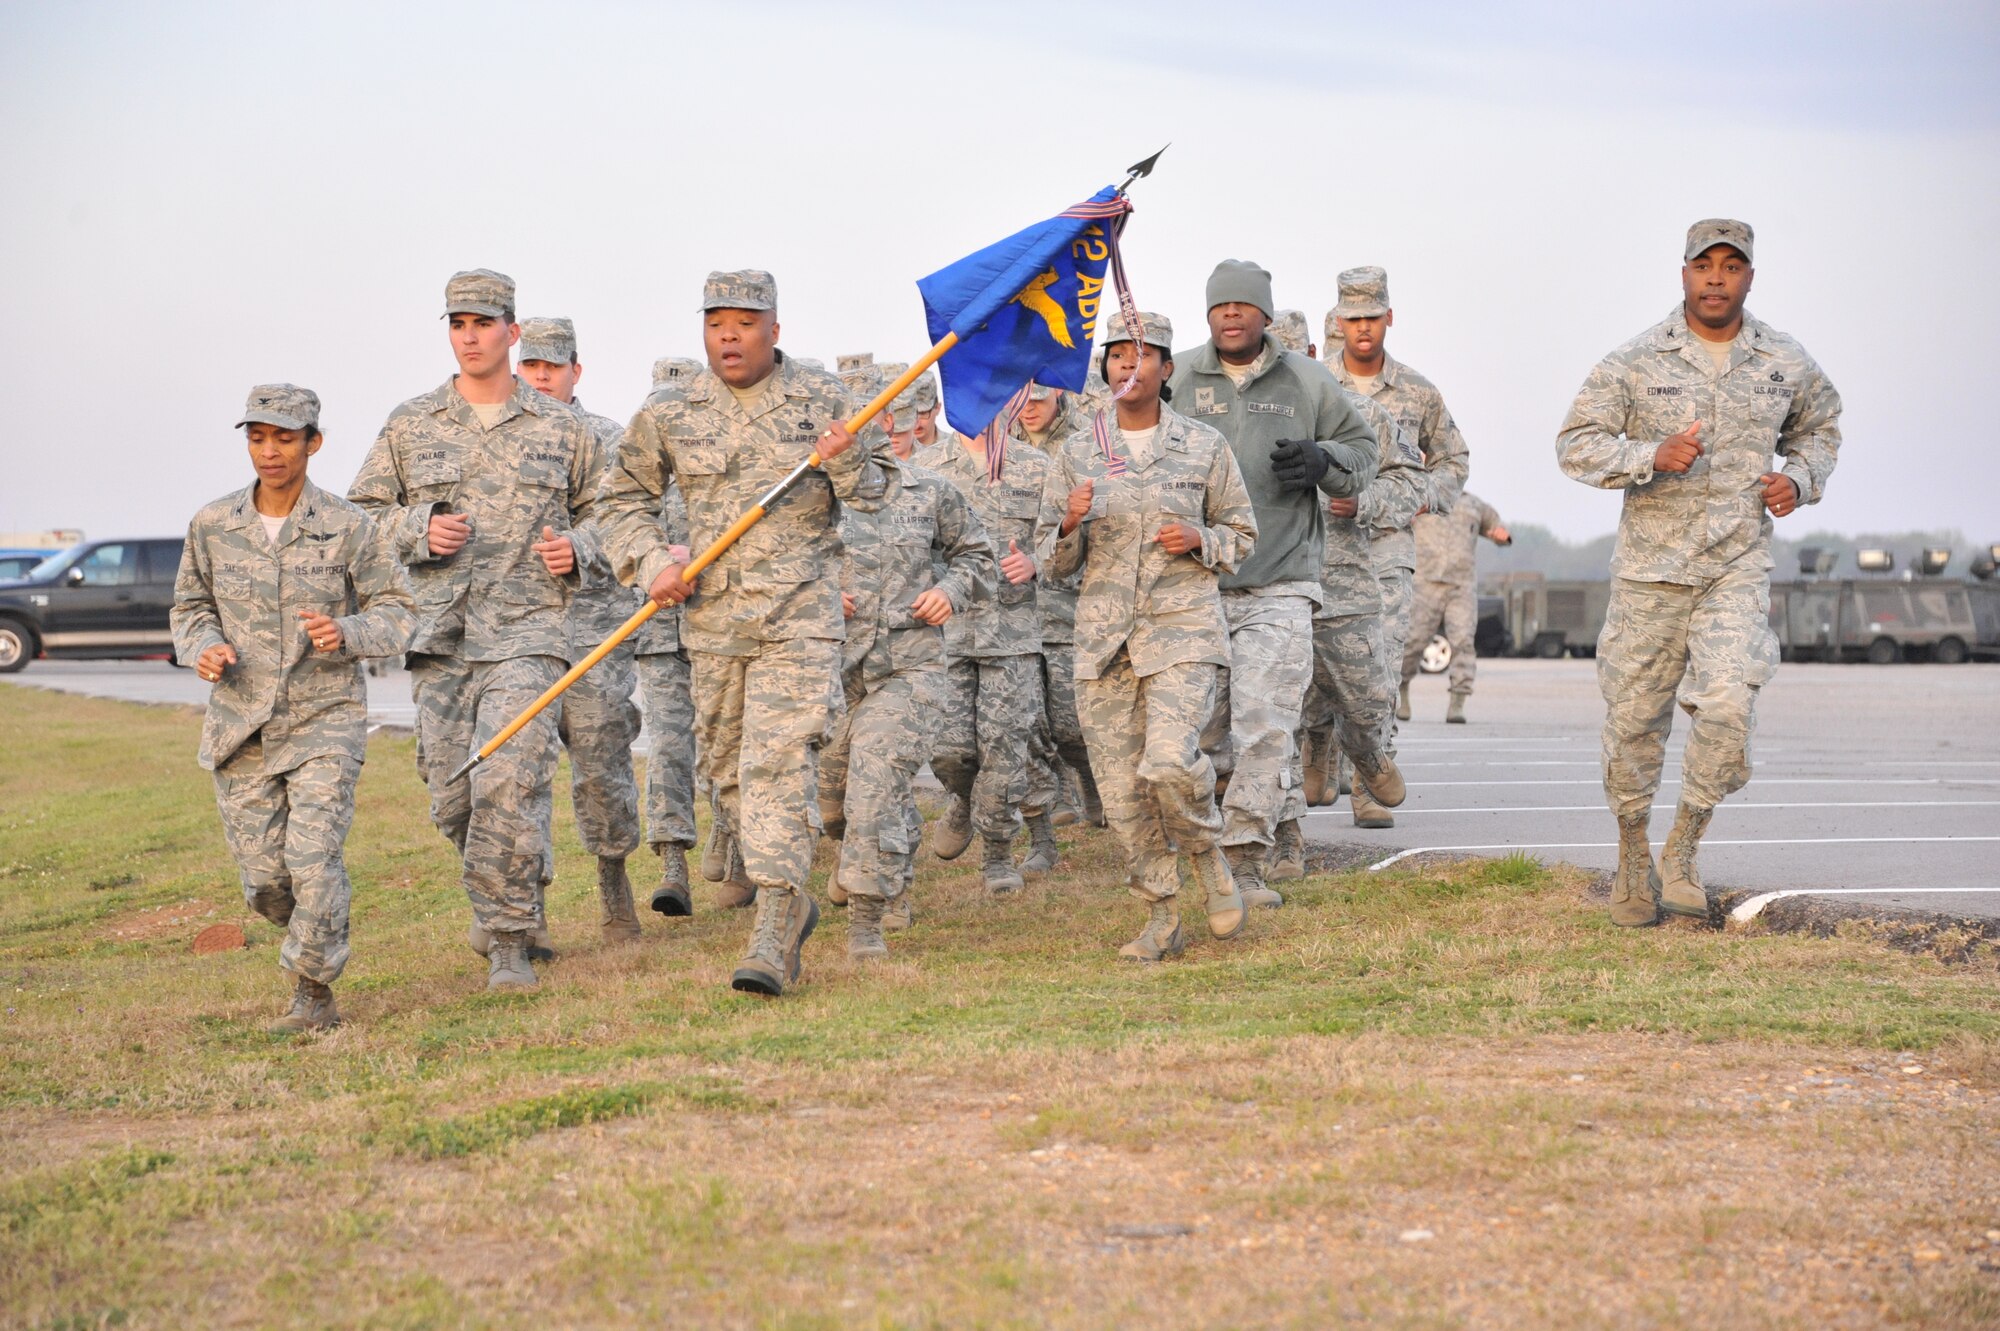 Colonel Trent Edwards, 42nd Air Base Wing commander, right, leads members of the wing in a formation run as part of the 2013 Air Force Assistance Fund kickoff rally March 29. (U.S. Air Force photo by Staff Sgt. Sandra Percival)